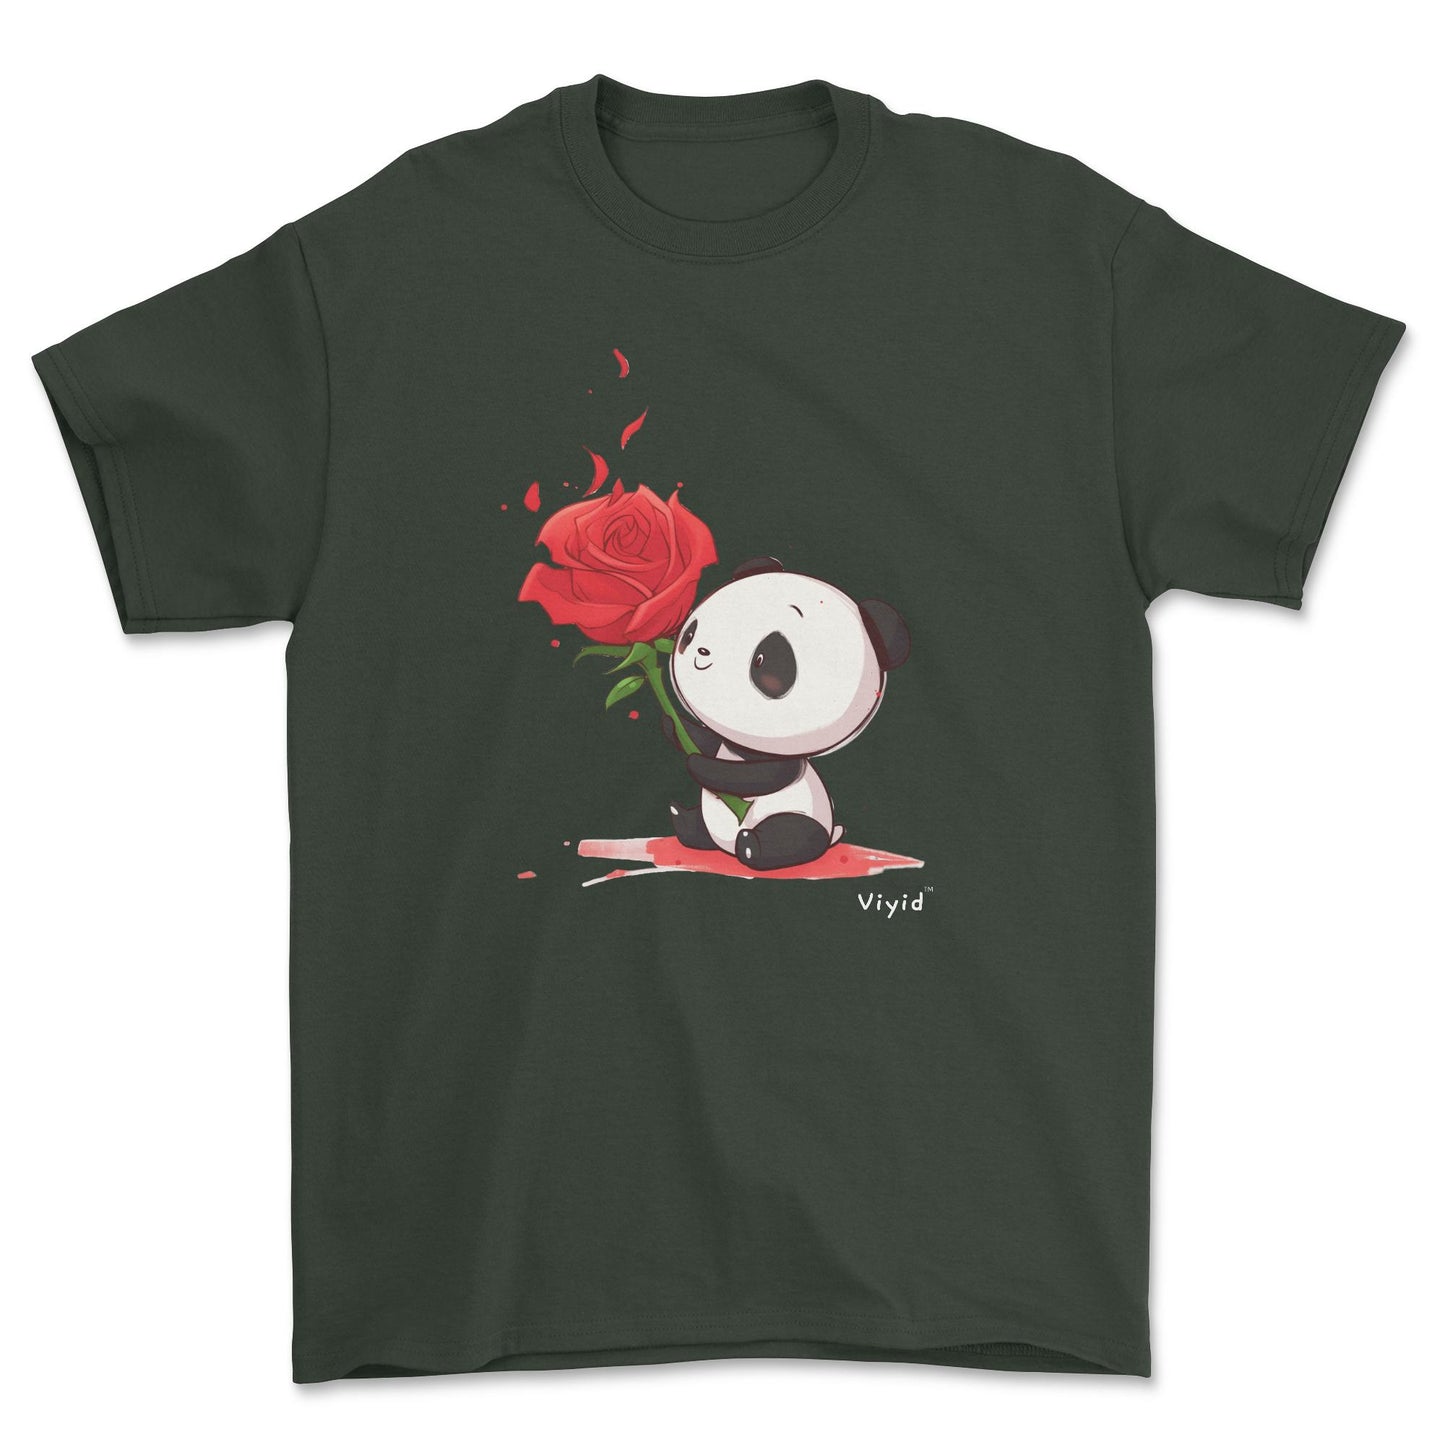 rose holding panda adult t-shirt forest green